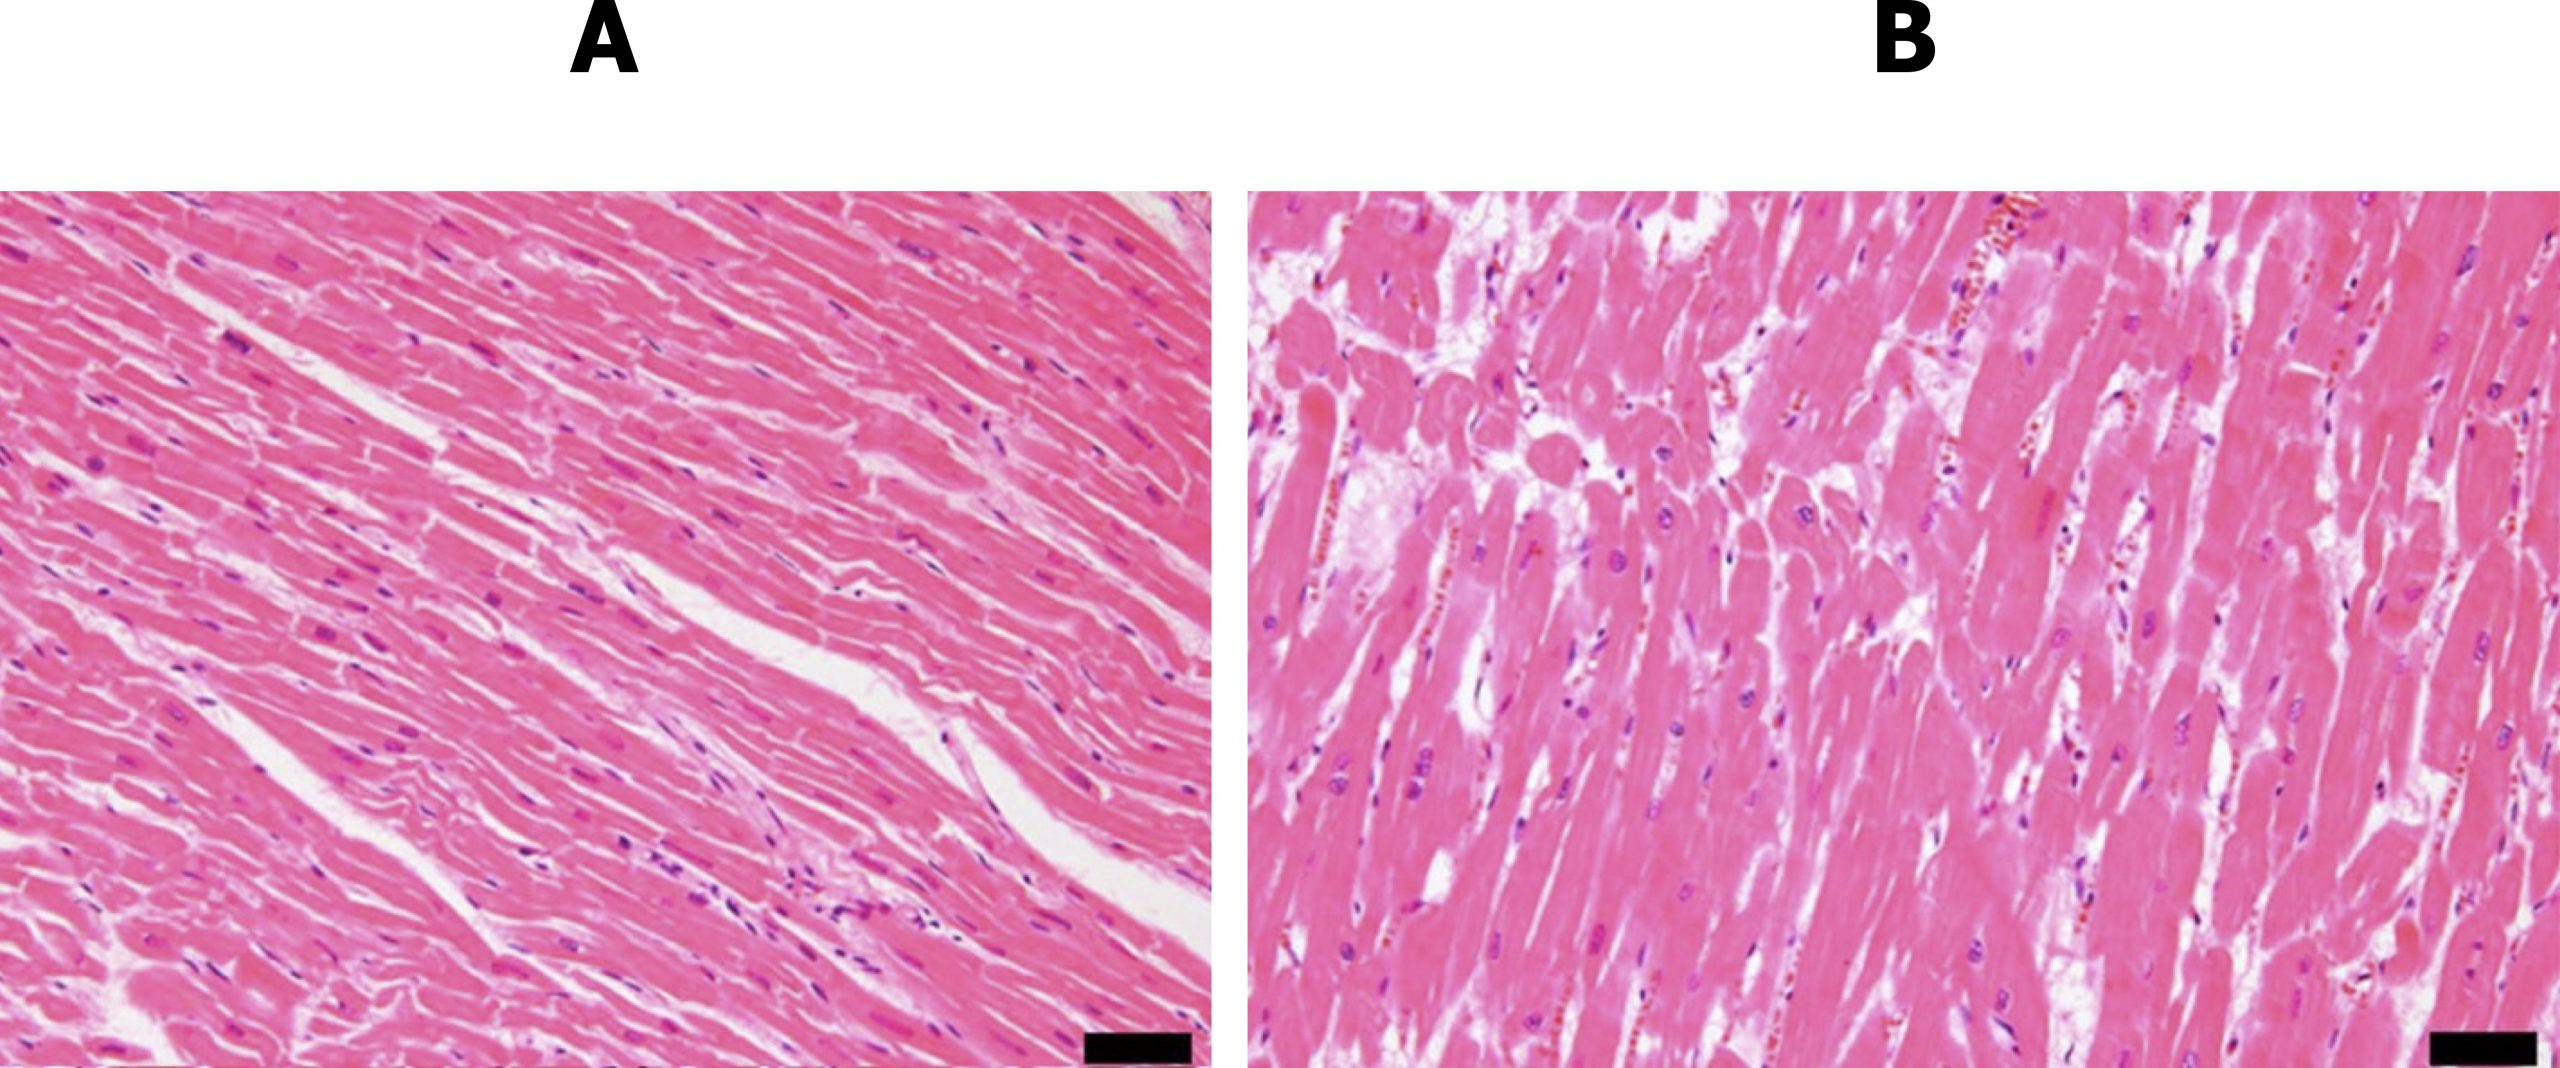 A histological section of normal myocardium is shown with thin, long, myocytes arranged in series and parallel with each other and little space in between. The nuclei of the normal, pink stained myocytes can be seen as small ovid purple dots. In contrast a histological slide of myocardium that has undergone concentric hypertrophy shows broad myocytes that do not have the same organized appearance, spaces between cells are seen and represent connective tissue that is present in this form of hypertrophy. The nuclei of the hypertrophied myocytes are larger and more square.